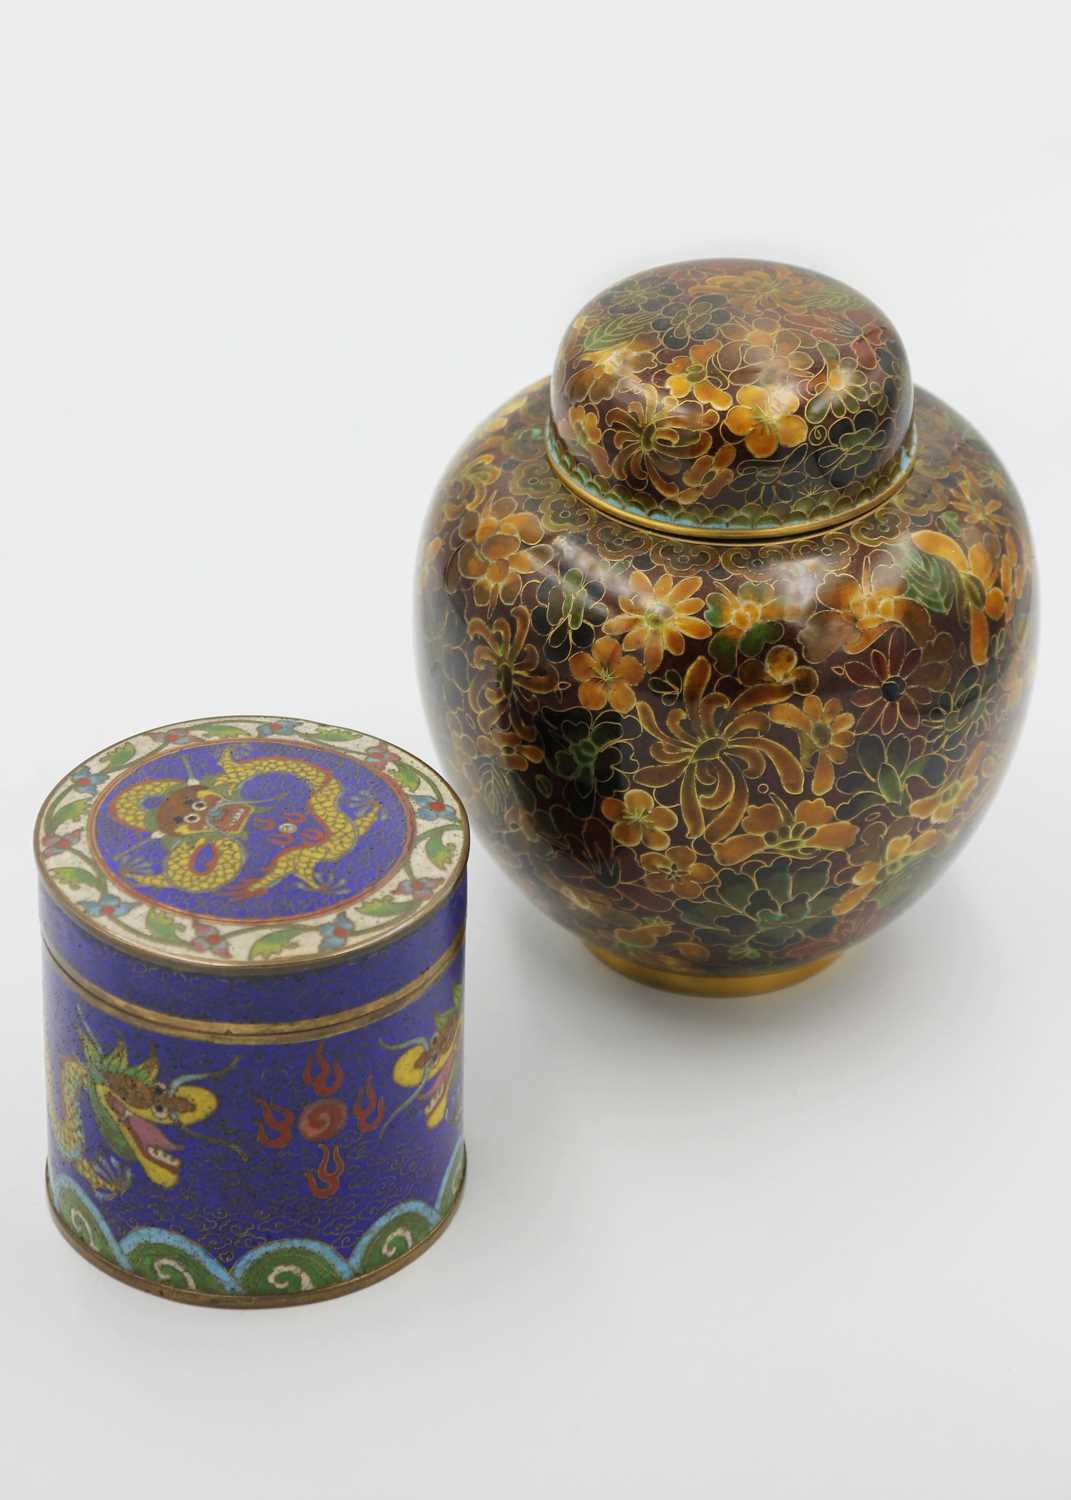 A Chinese cloisonne circular jar and cover, late 19th century. - Image 4 of 8